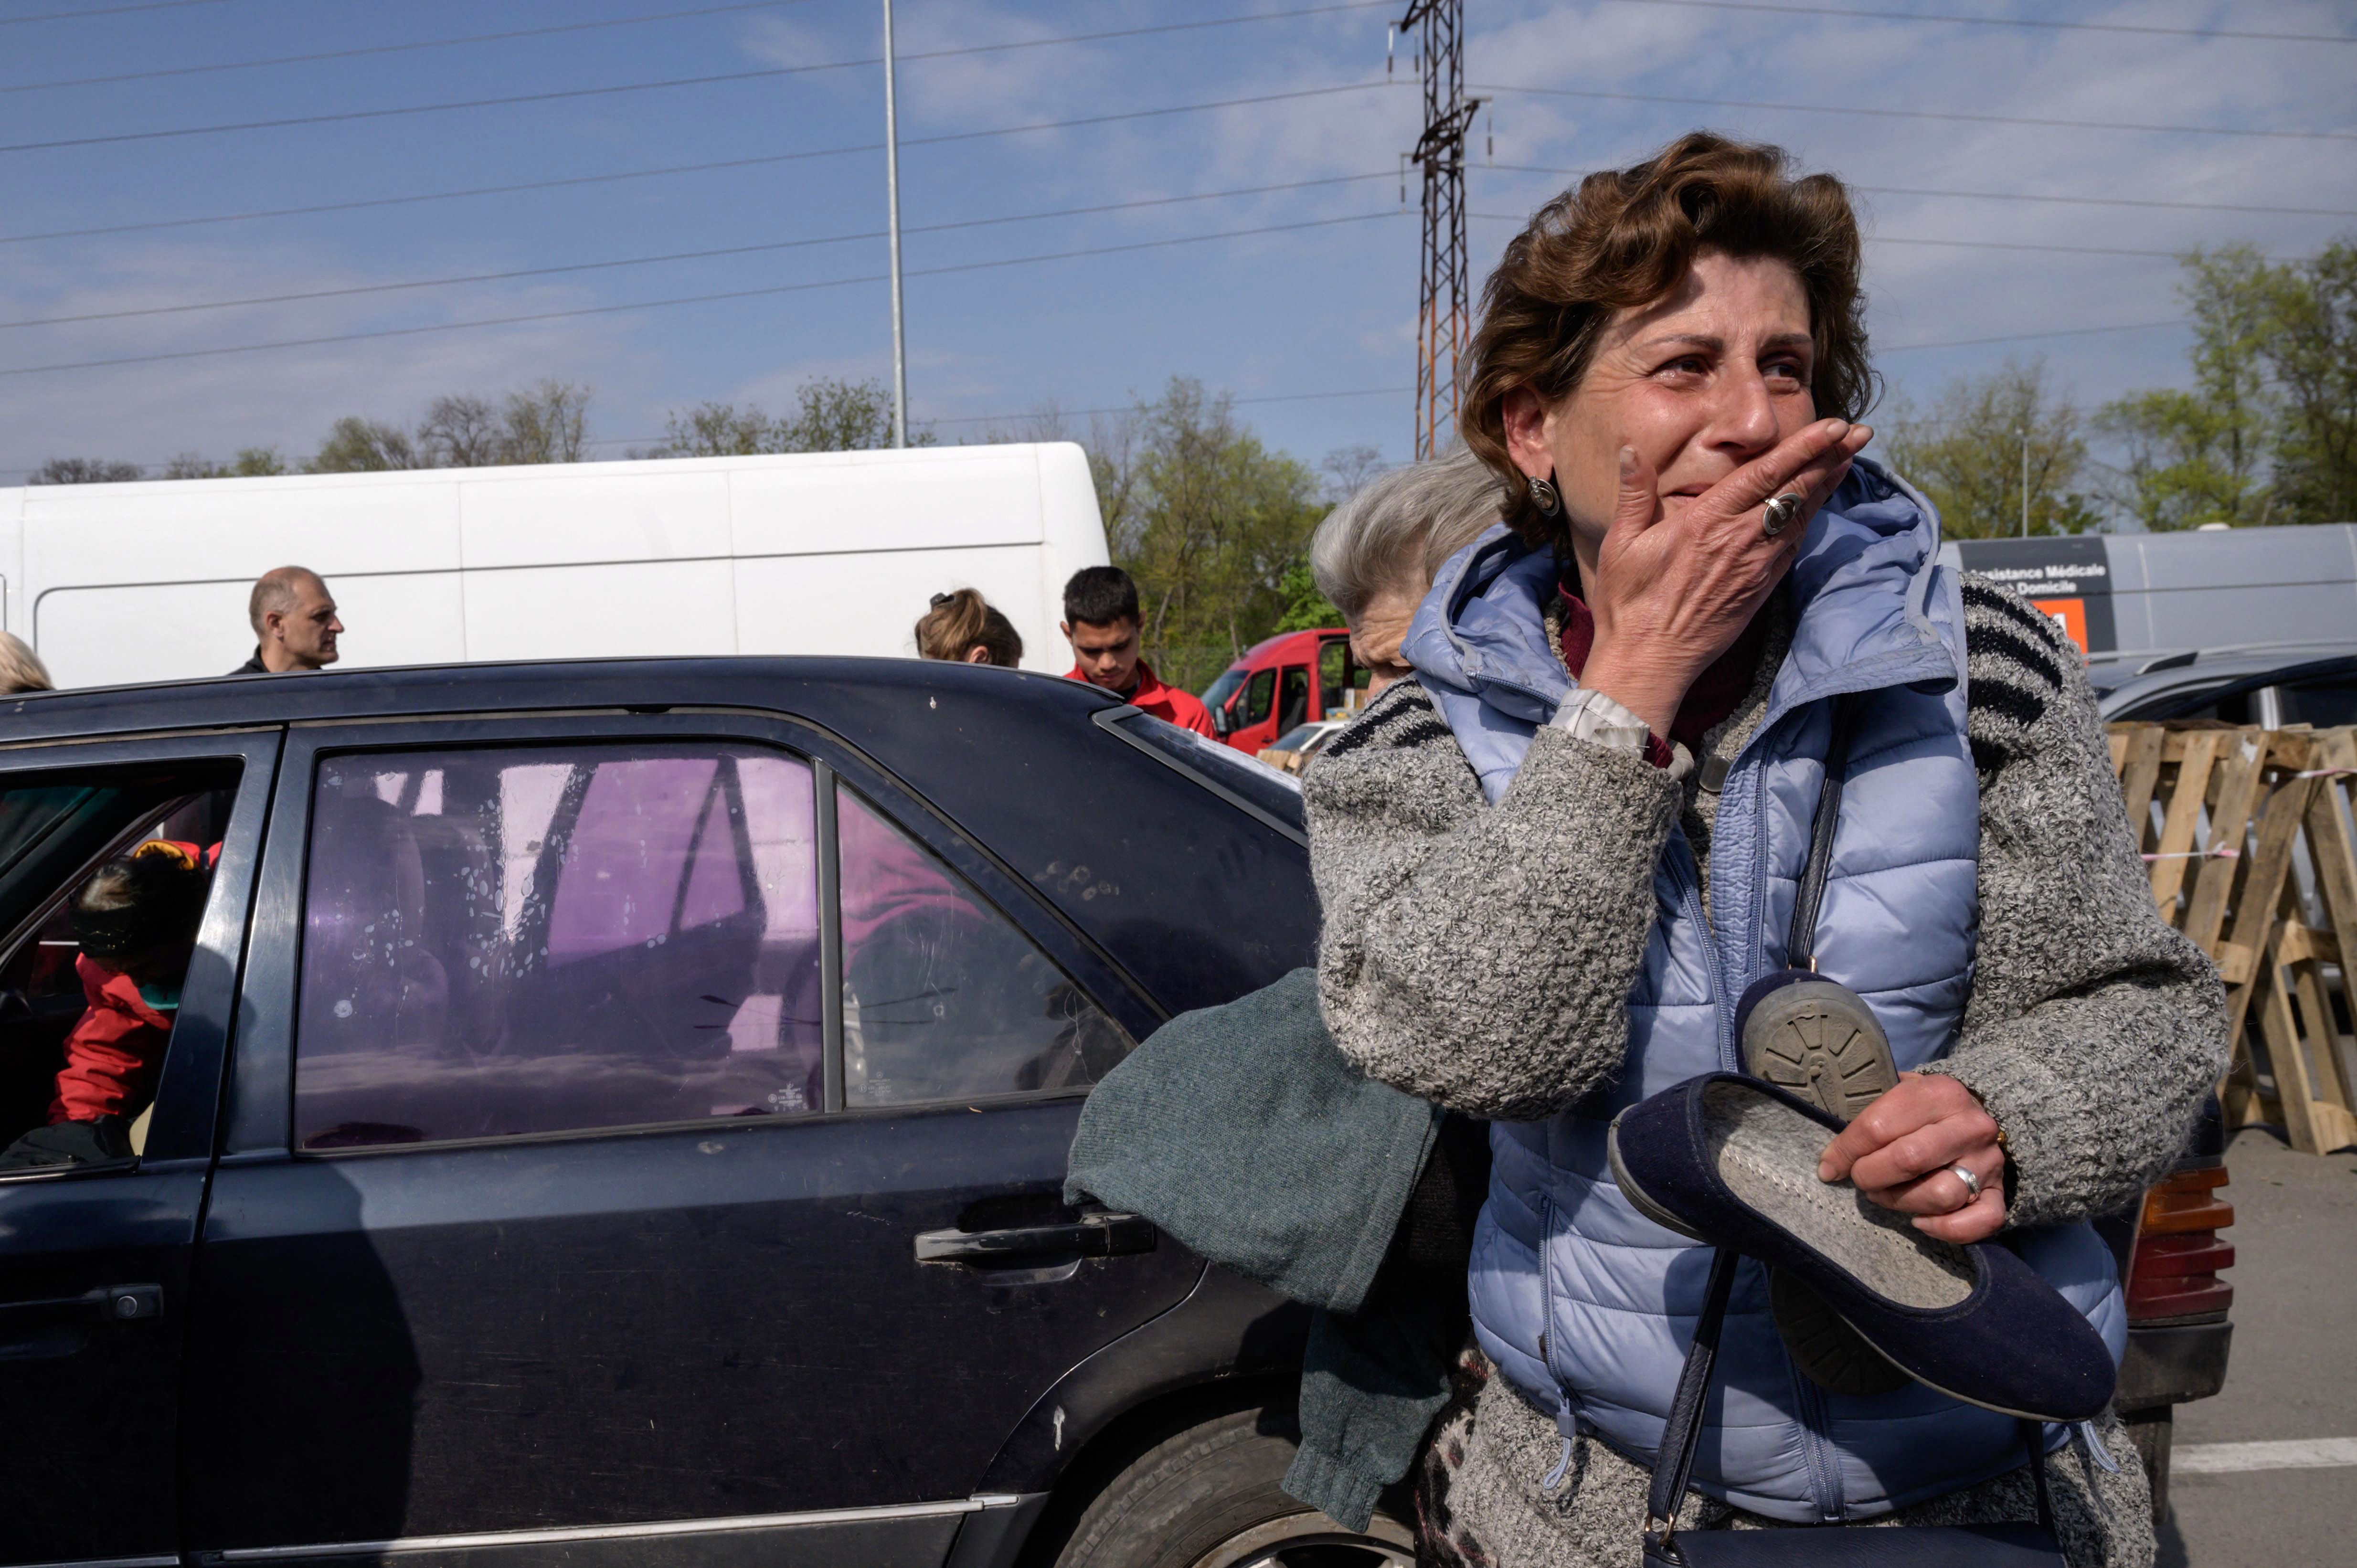 Natasha from Mariupol reacts as she arrives in her own vehicle at a registration and processing area in Zaporizhzhia